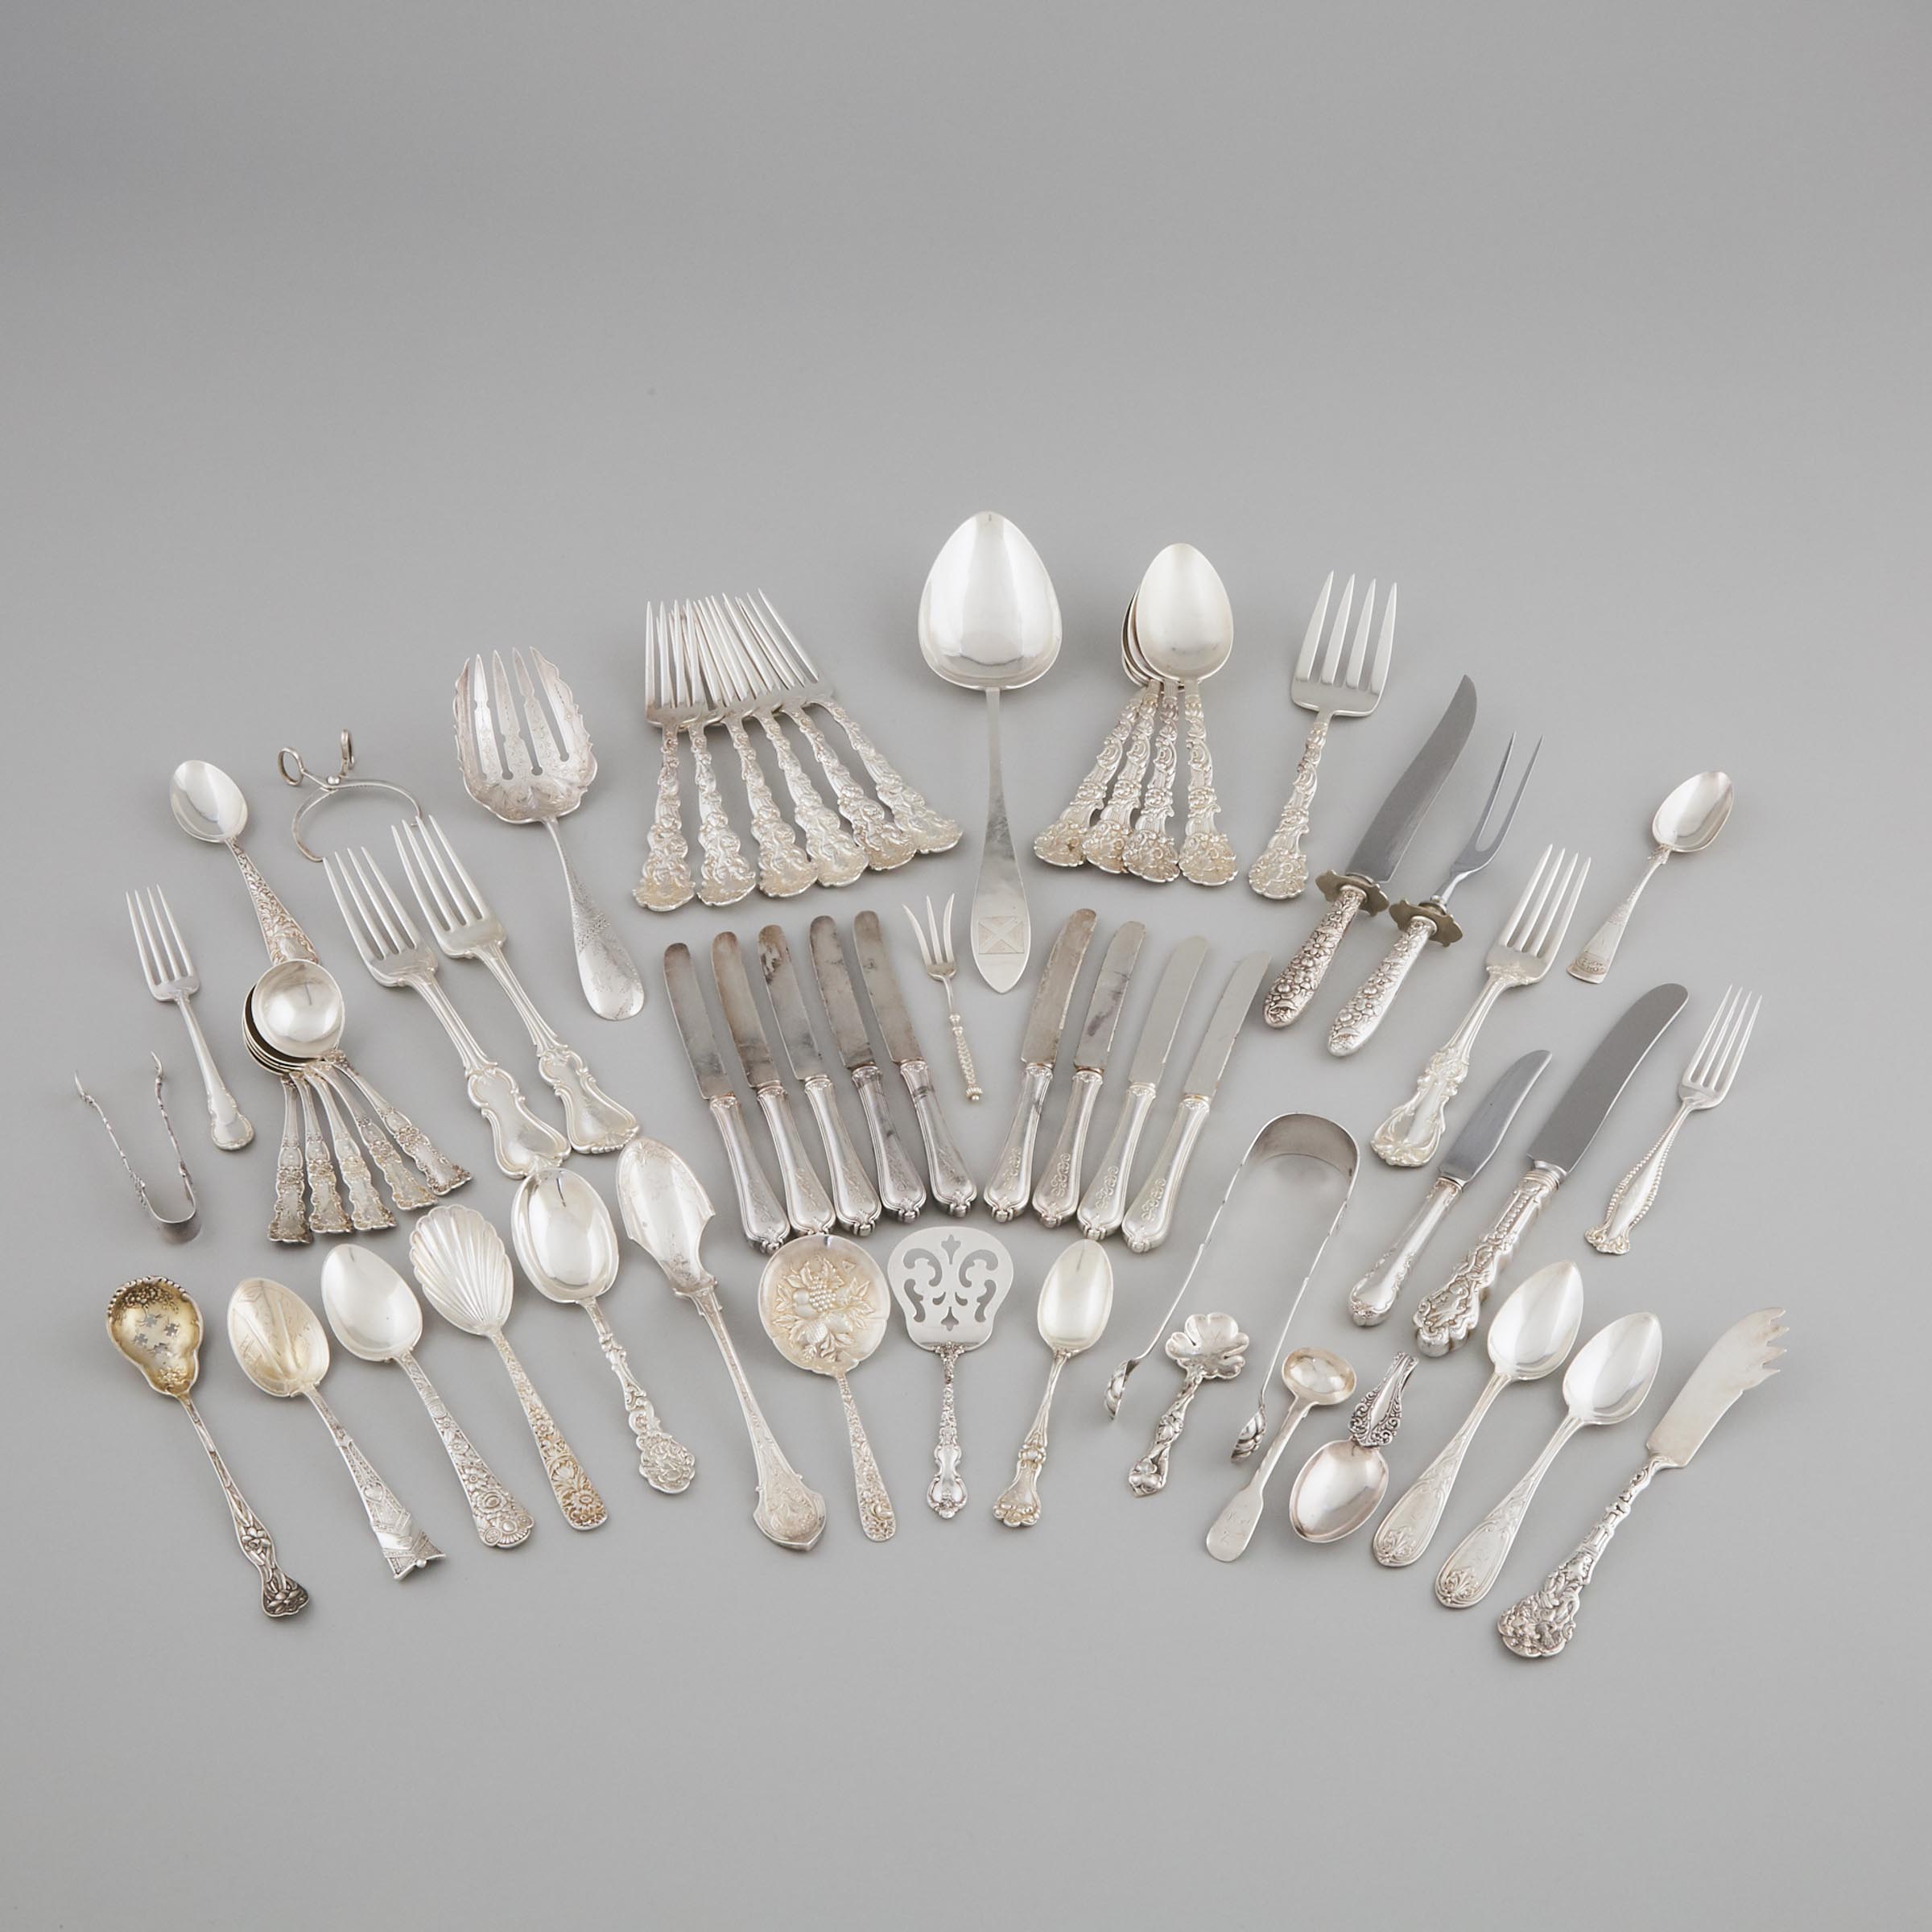 Group of Mainly North American Silver Flatware, 19th/20th century